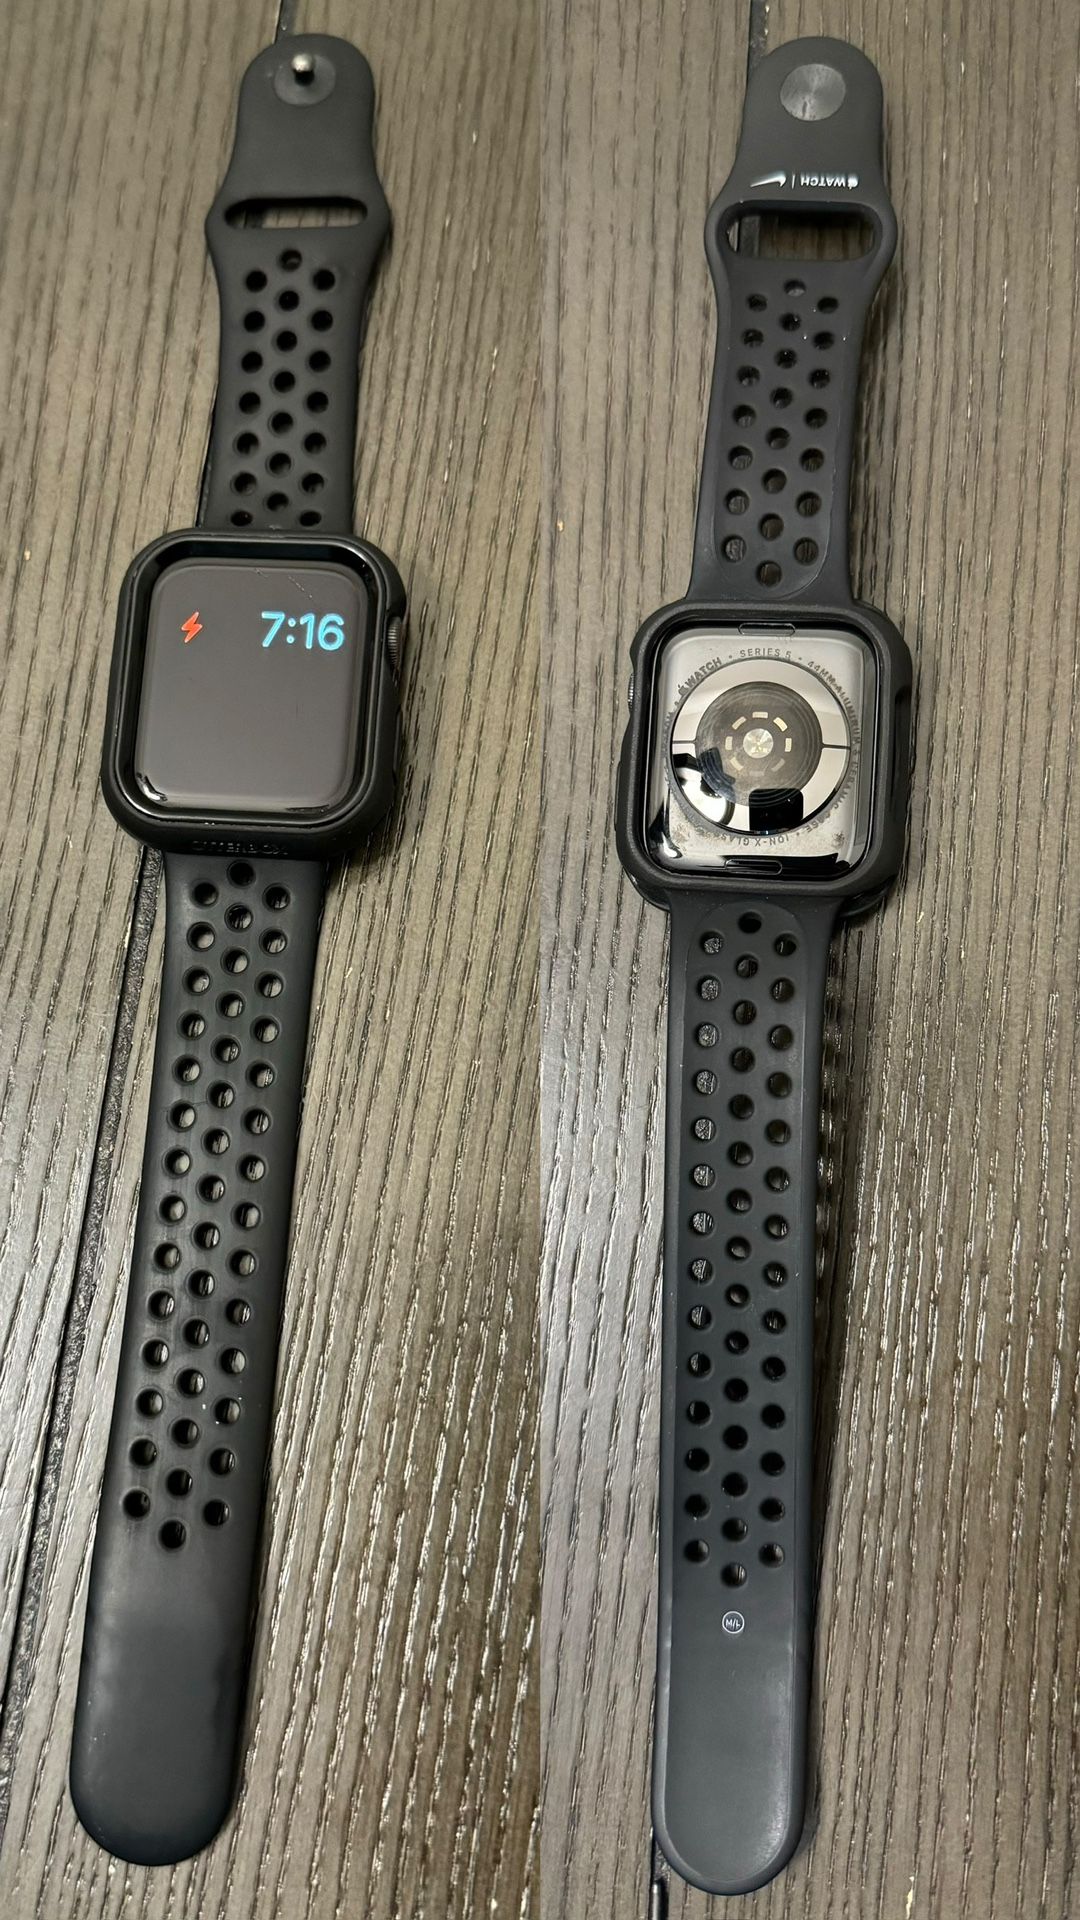 Apple Watch Series 5 (GPS + Cellular, 44MM) - Space Gray Aluminum Case with Black Sport Band 